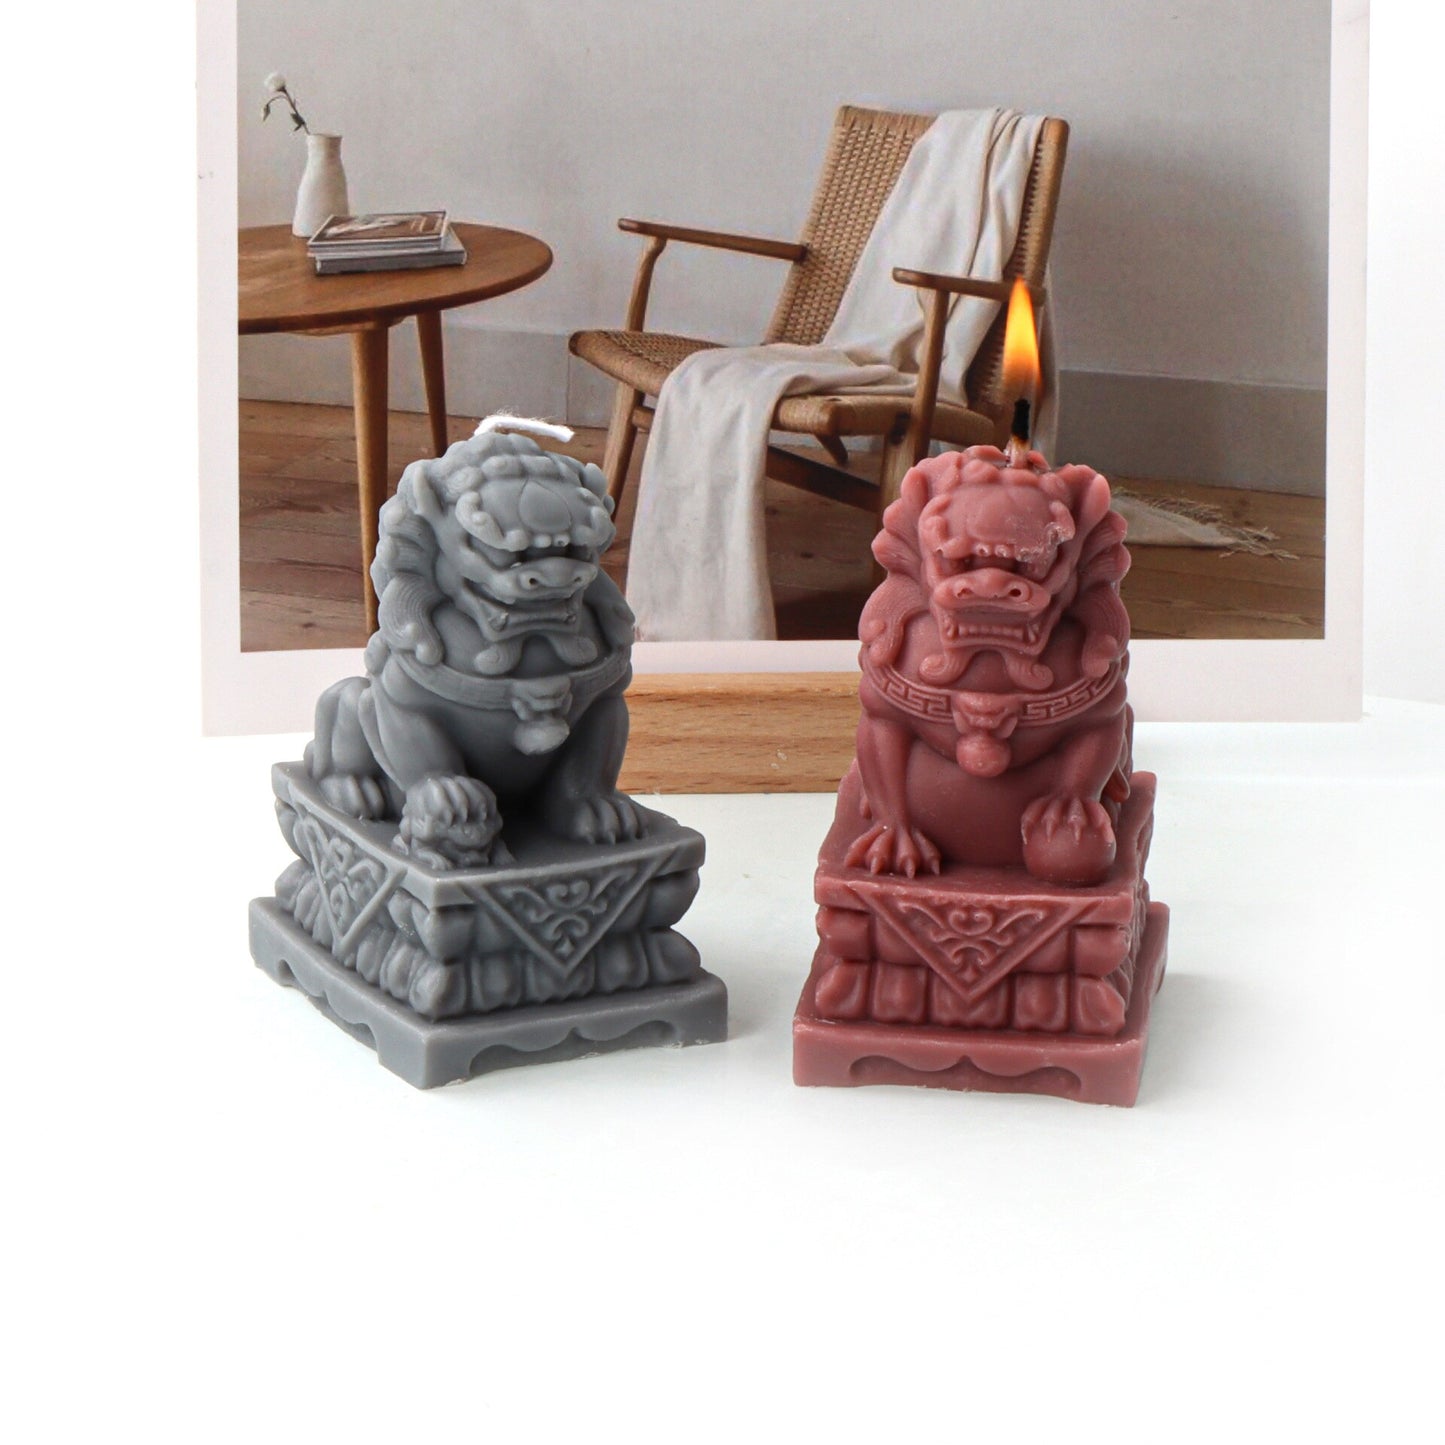 3D DIY Lovely Stone Lion Candle Silicone Mold Simulation Animal Lion Concrete Plaster Silicone Mold Home Decoration clay molds